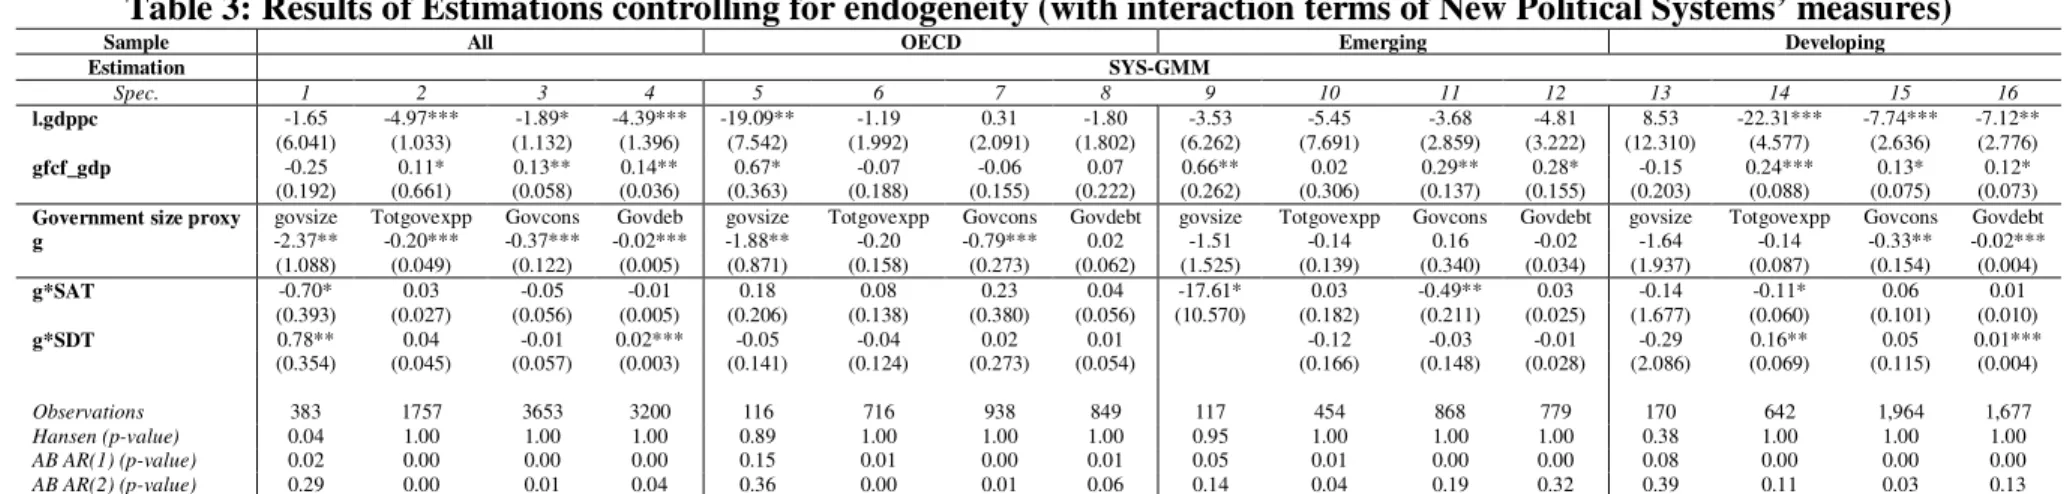 Table 3: Results of Estimations controlling for endogeneity (with interaction terms of New Political Systems’ measures) 